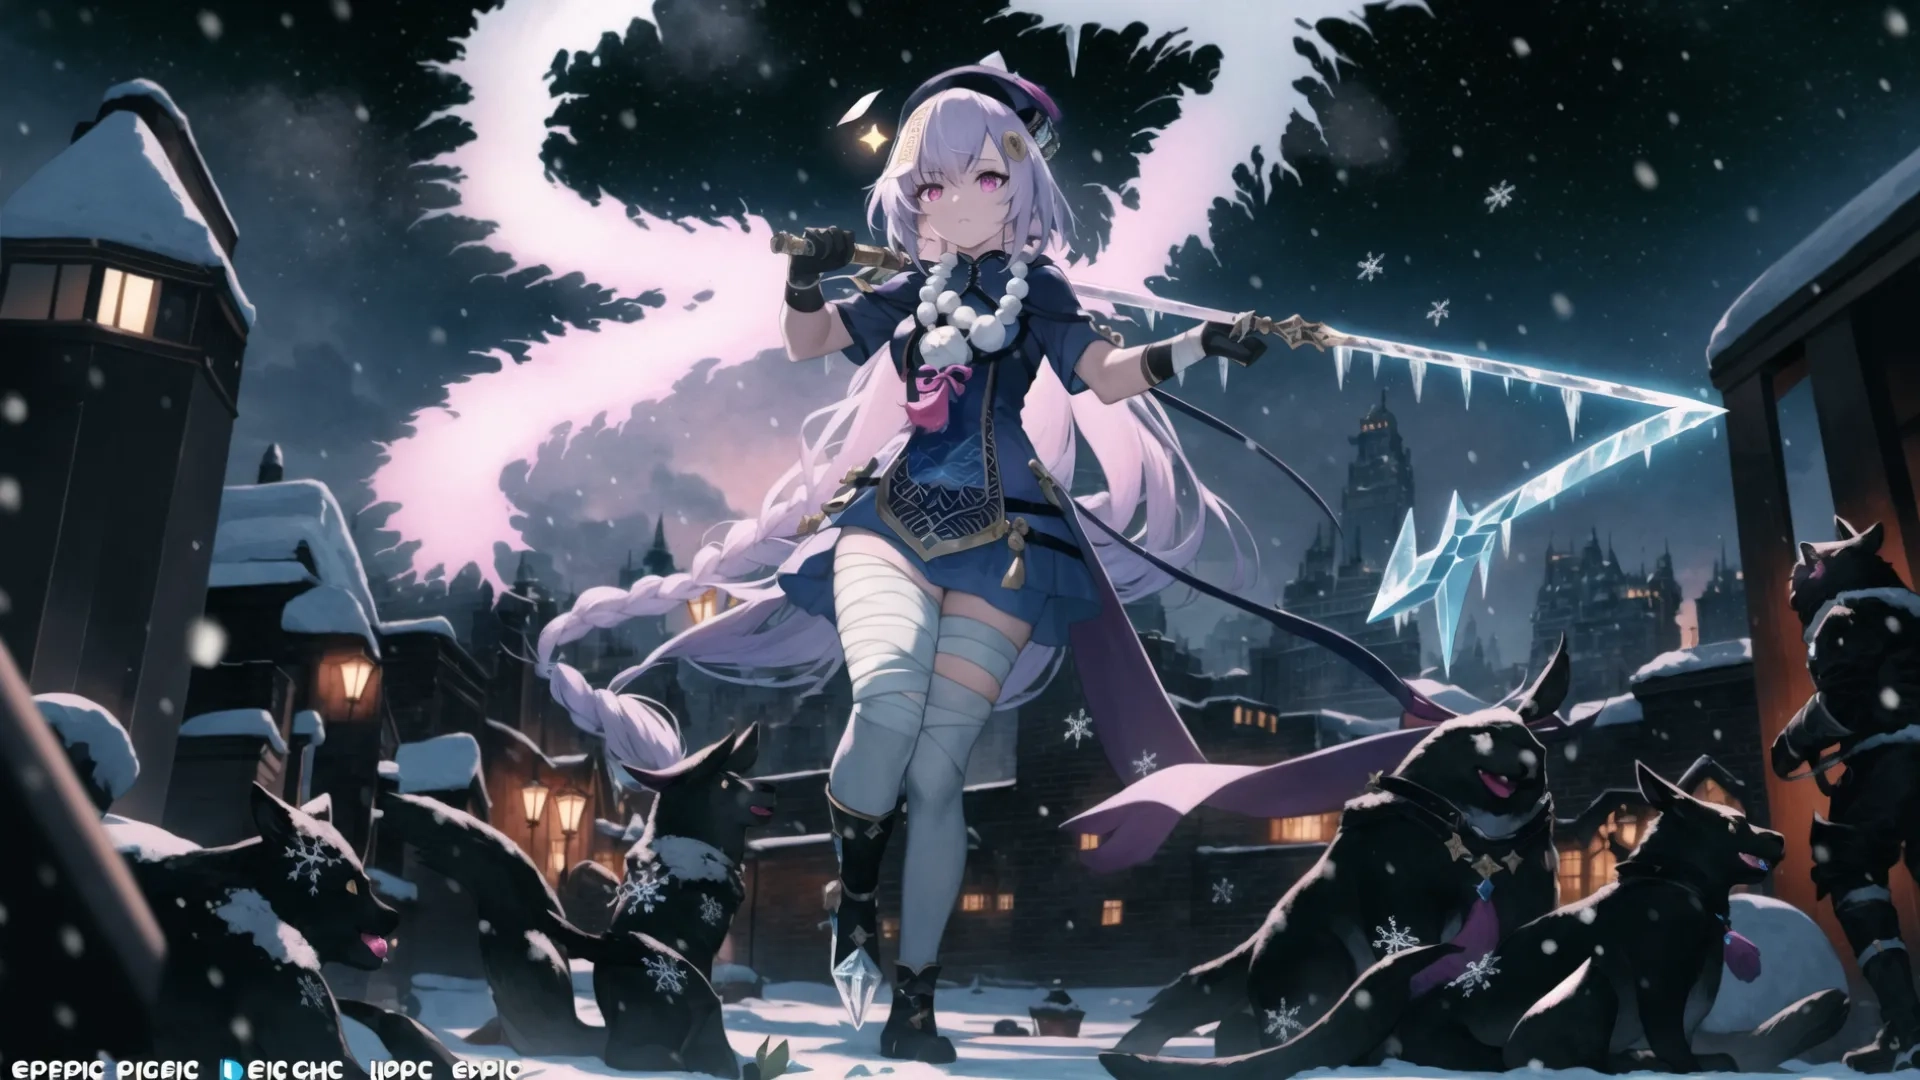 game character female standing among lots of soldiers in the snow at nighttime with their weapons and looking at something that has thrown off the ground below her
